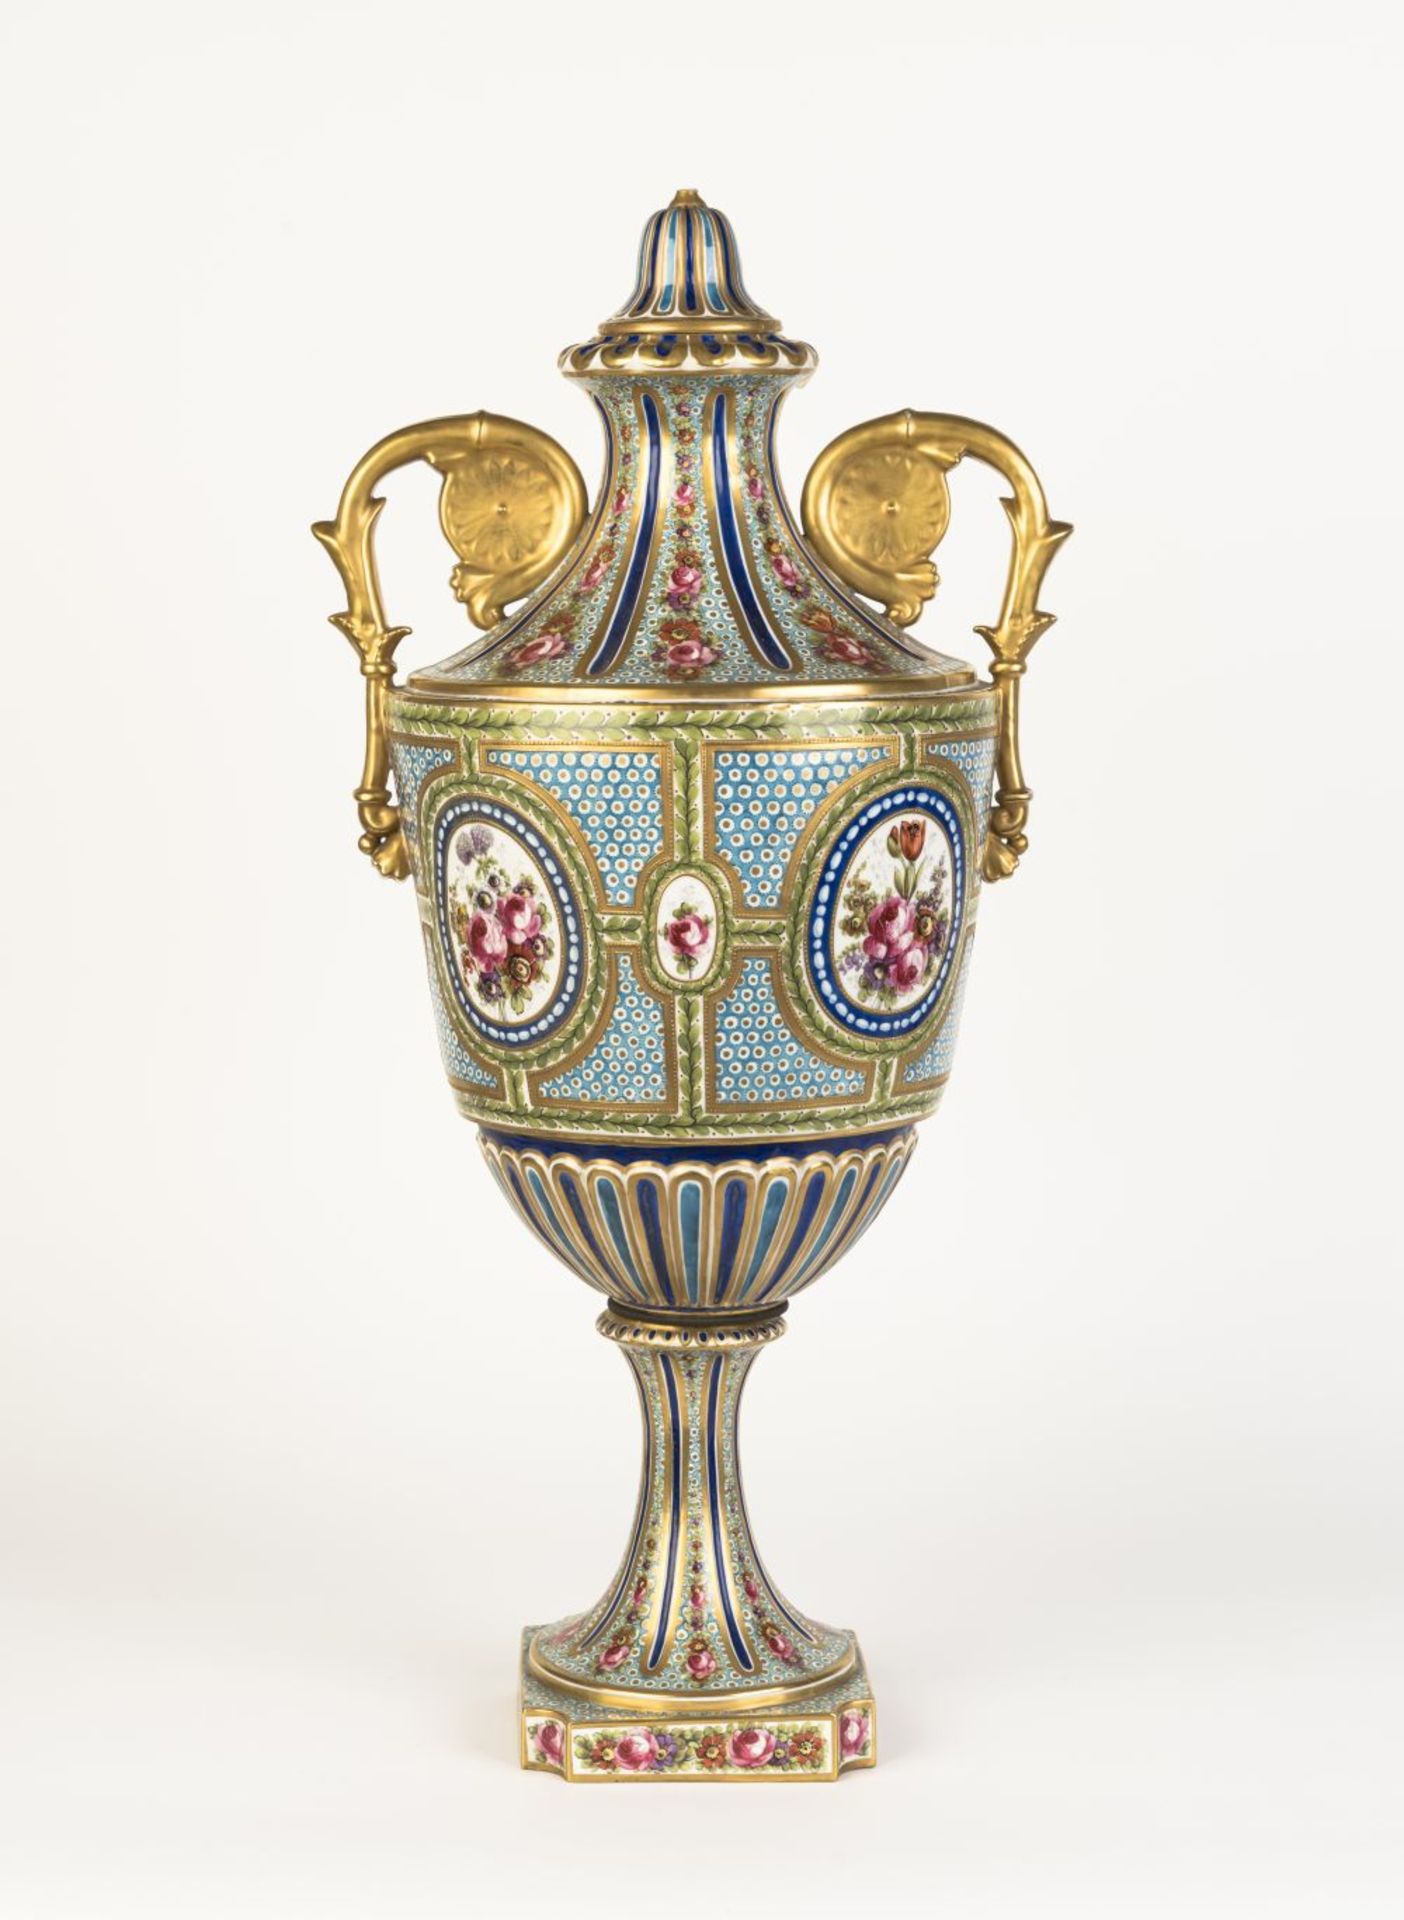 A S&#200;VRES-STYLE PORCELAIN TWO-HANDLED BALUSTER VASE Paris, 20th century